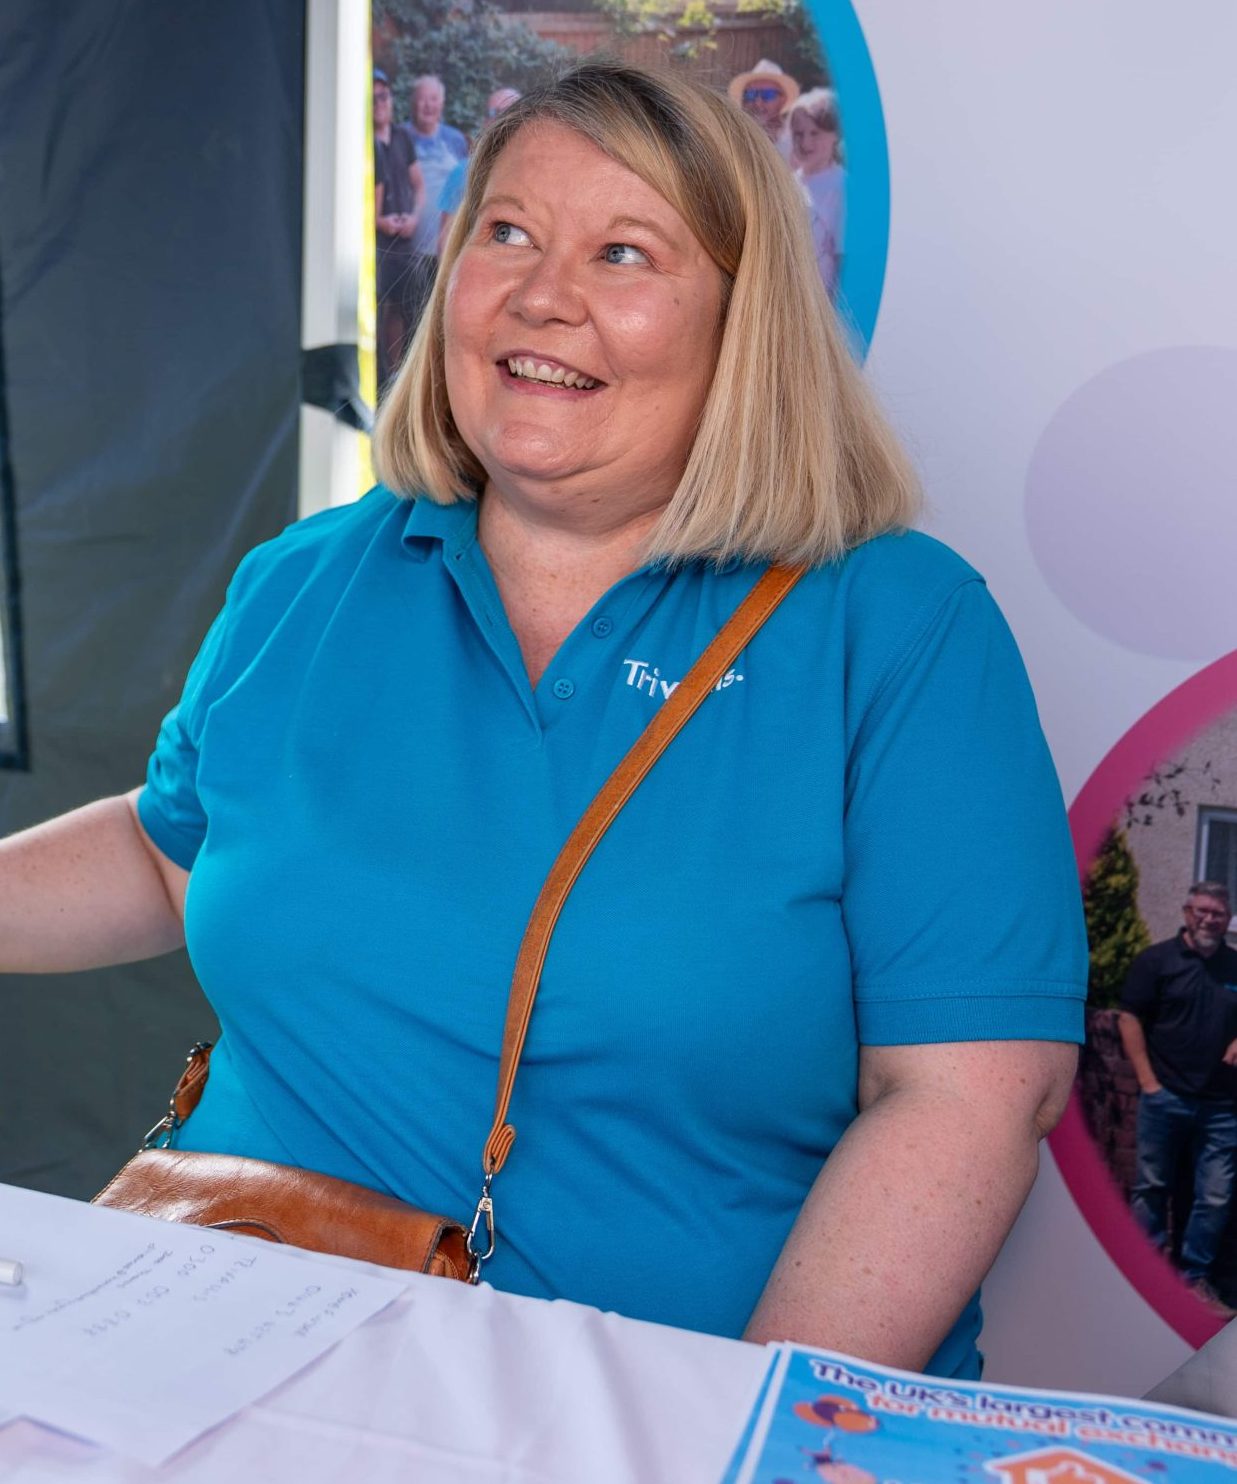 Trivallis Housing Landlord Wales A cheerful woman in a blue polo shirt engaged in a light-hearted conversation at a Trivallis Community Housing event booth.